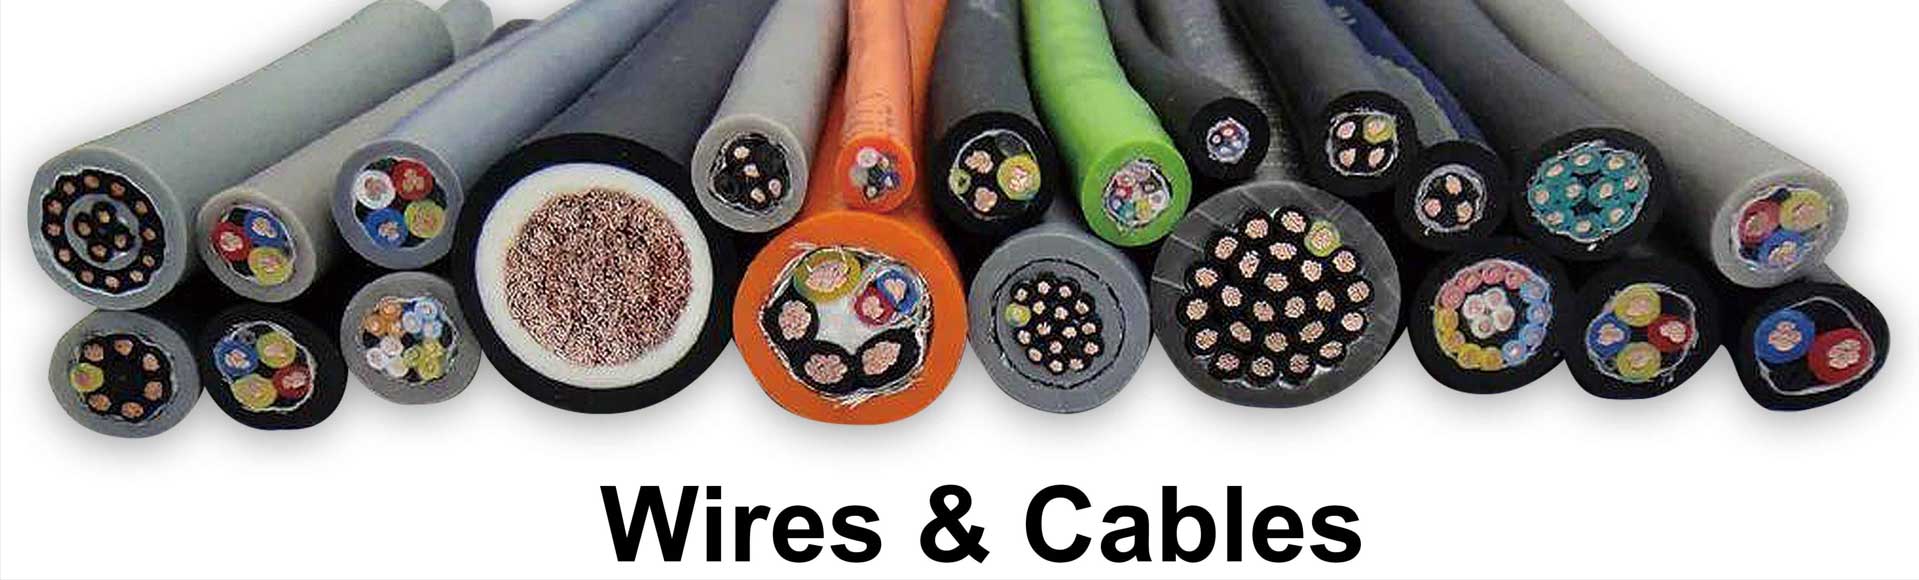 What are the dangers of using unqualified wires and cables?